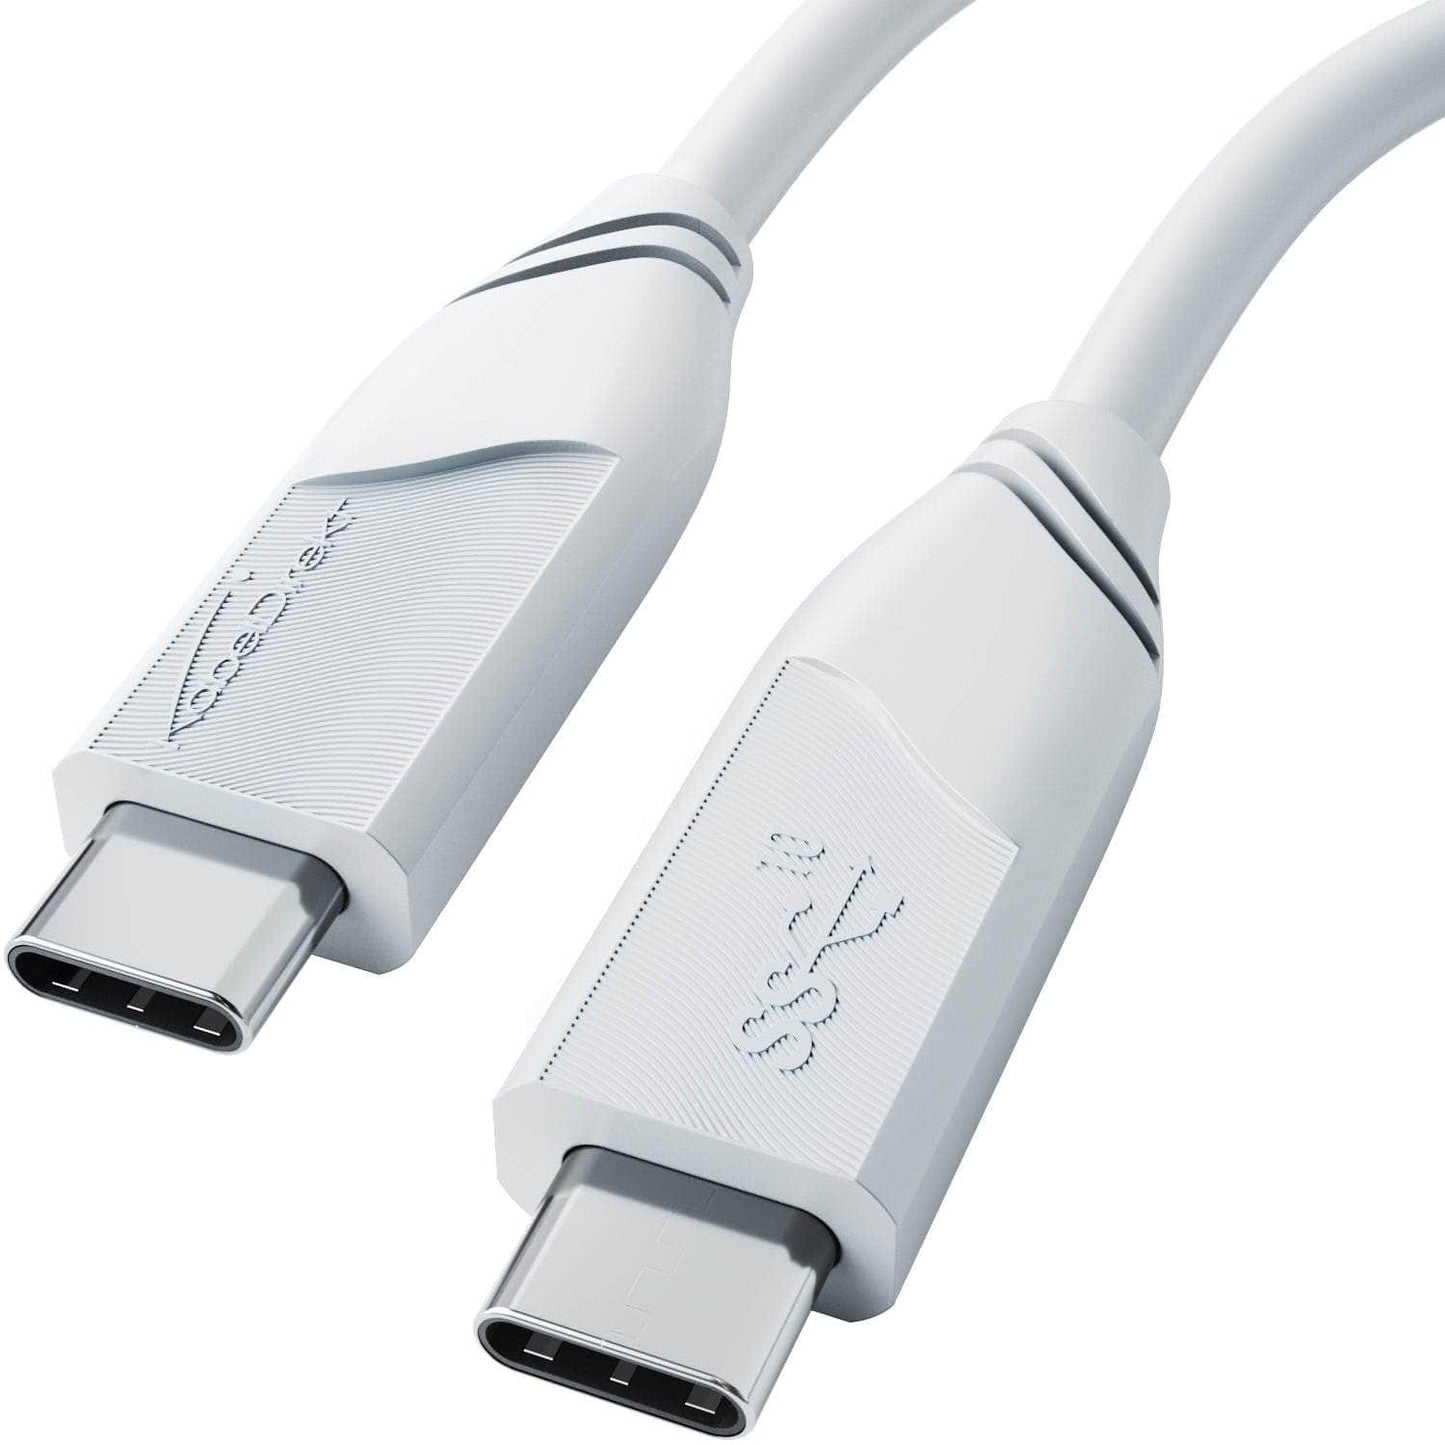 USB C Cable - USB 3.2, Power Delivery 3, white